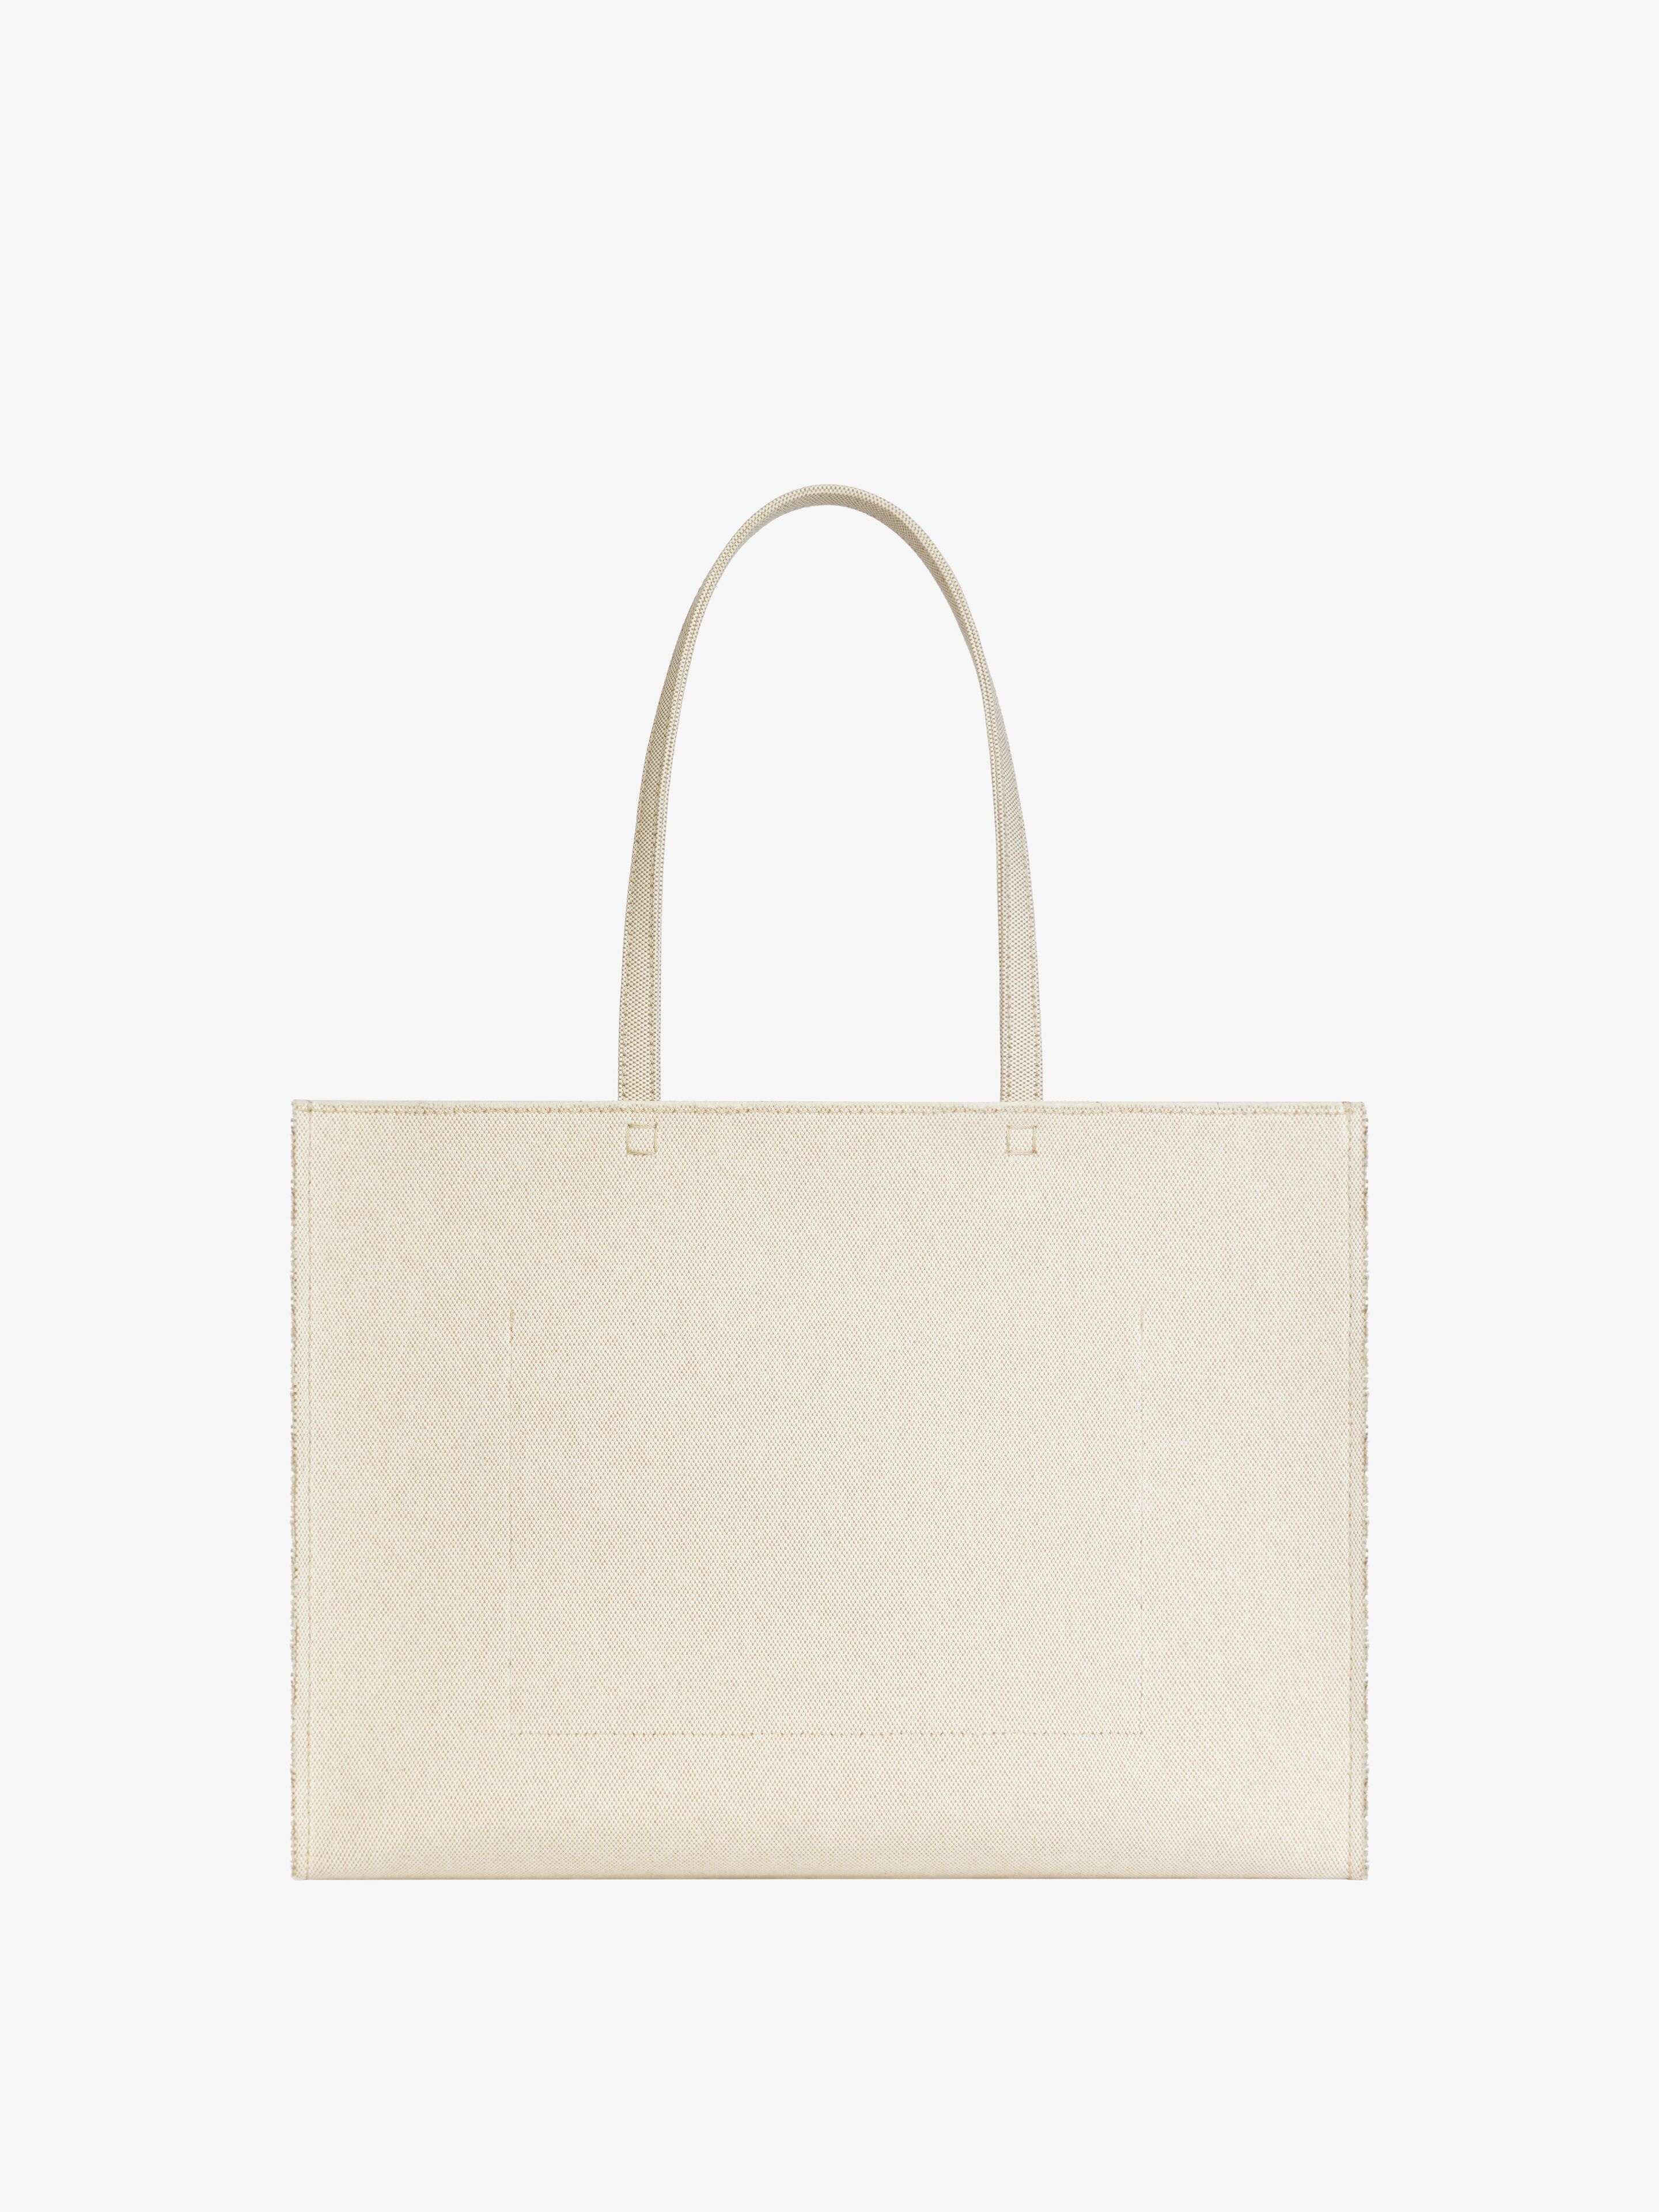 LARGE G-TOTE SHOPPING BAG IN CANVAS - 4